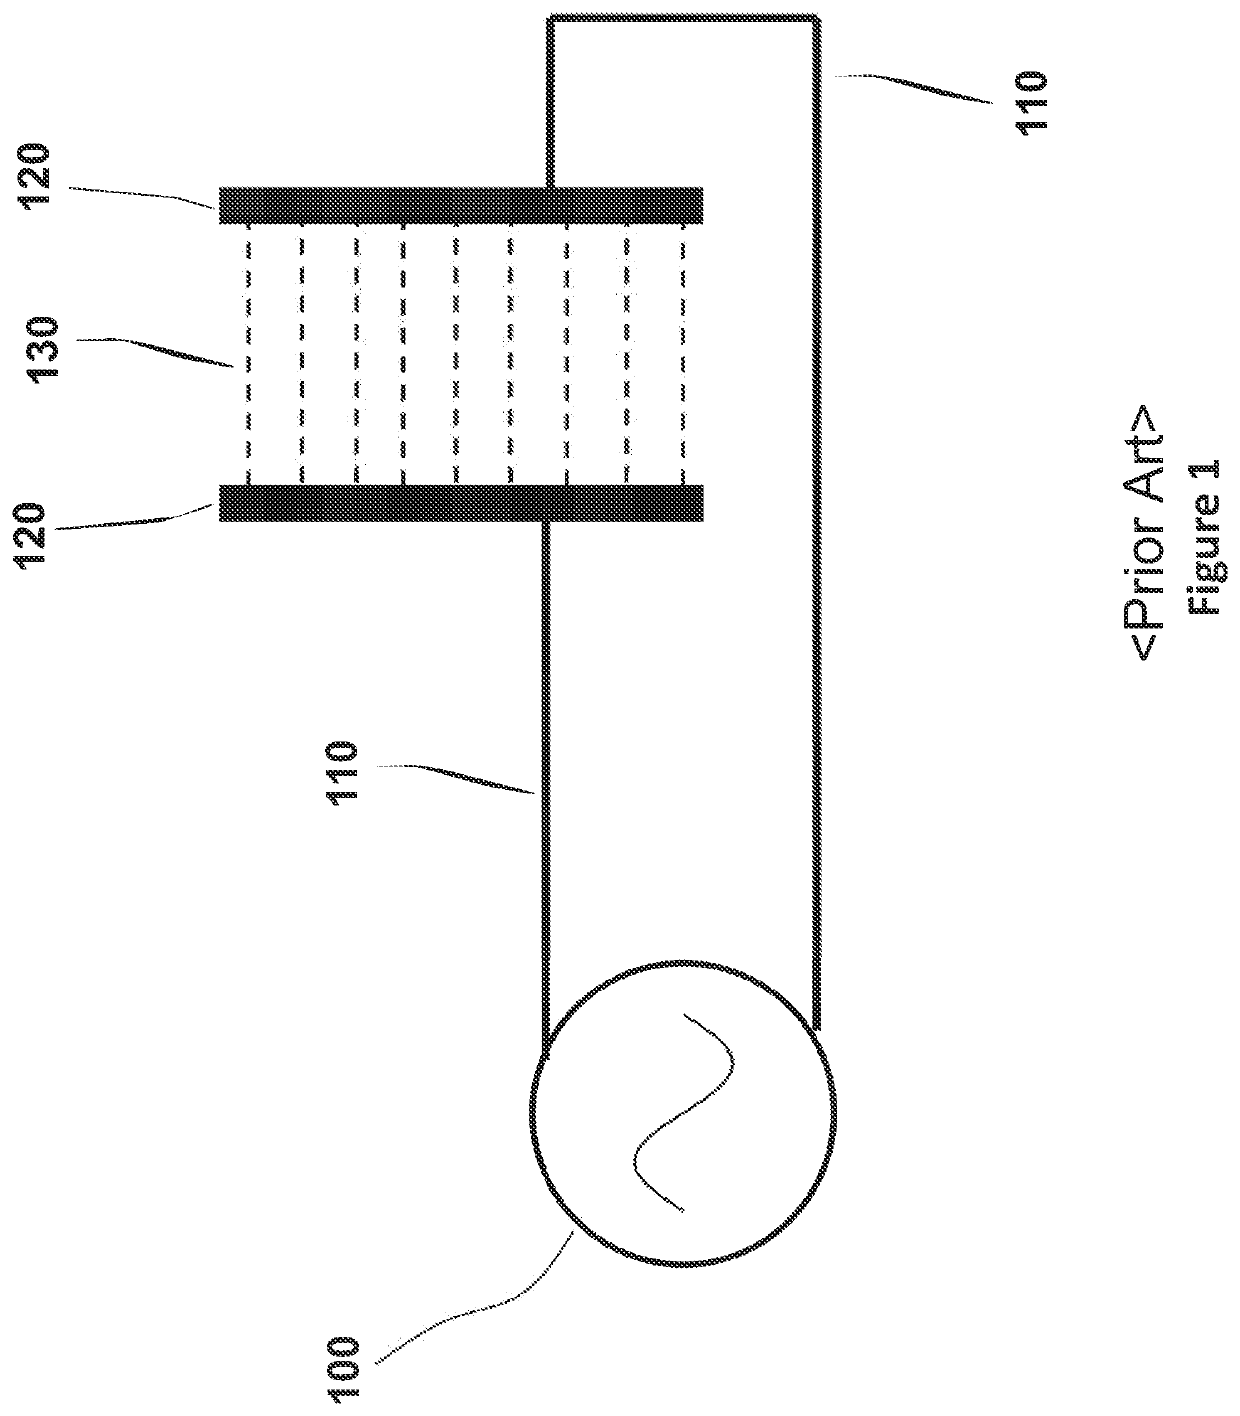 Apparatus for treating tumors by evanescent waves